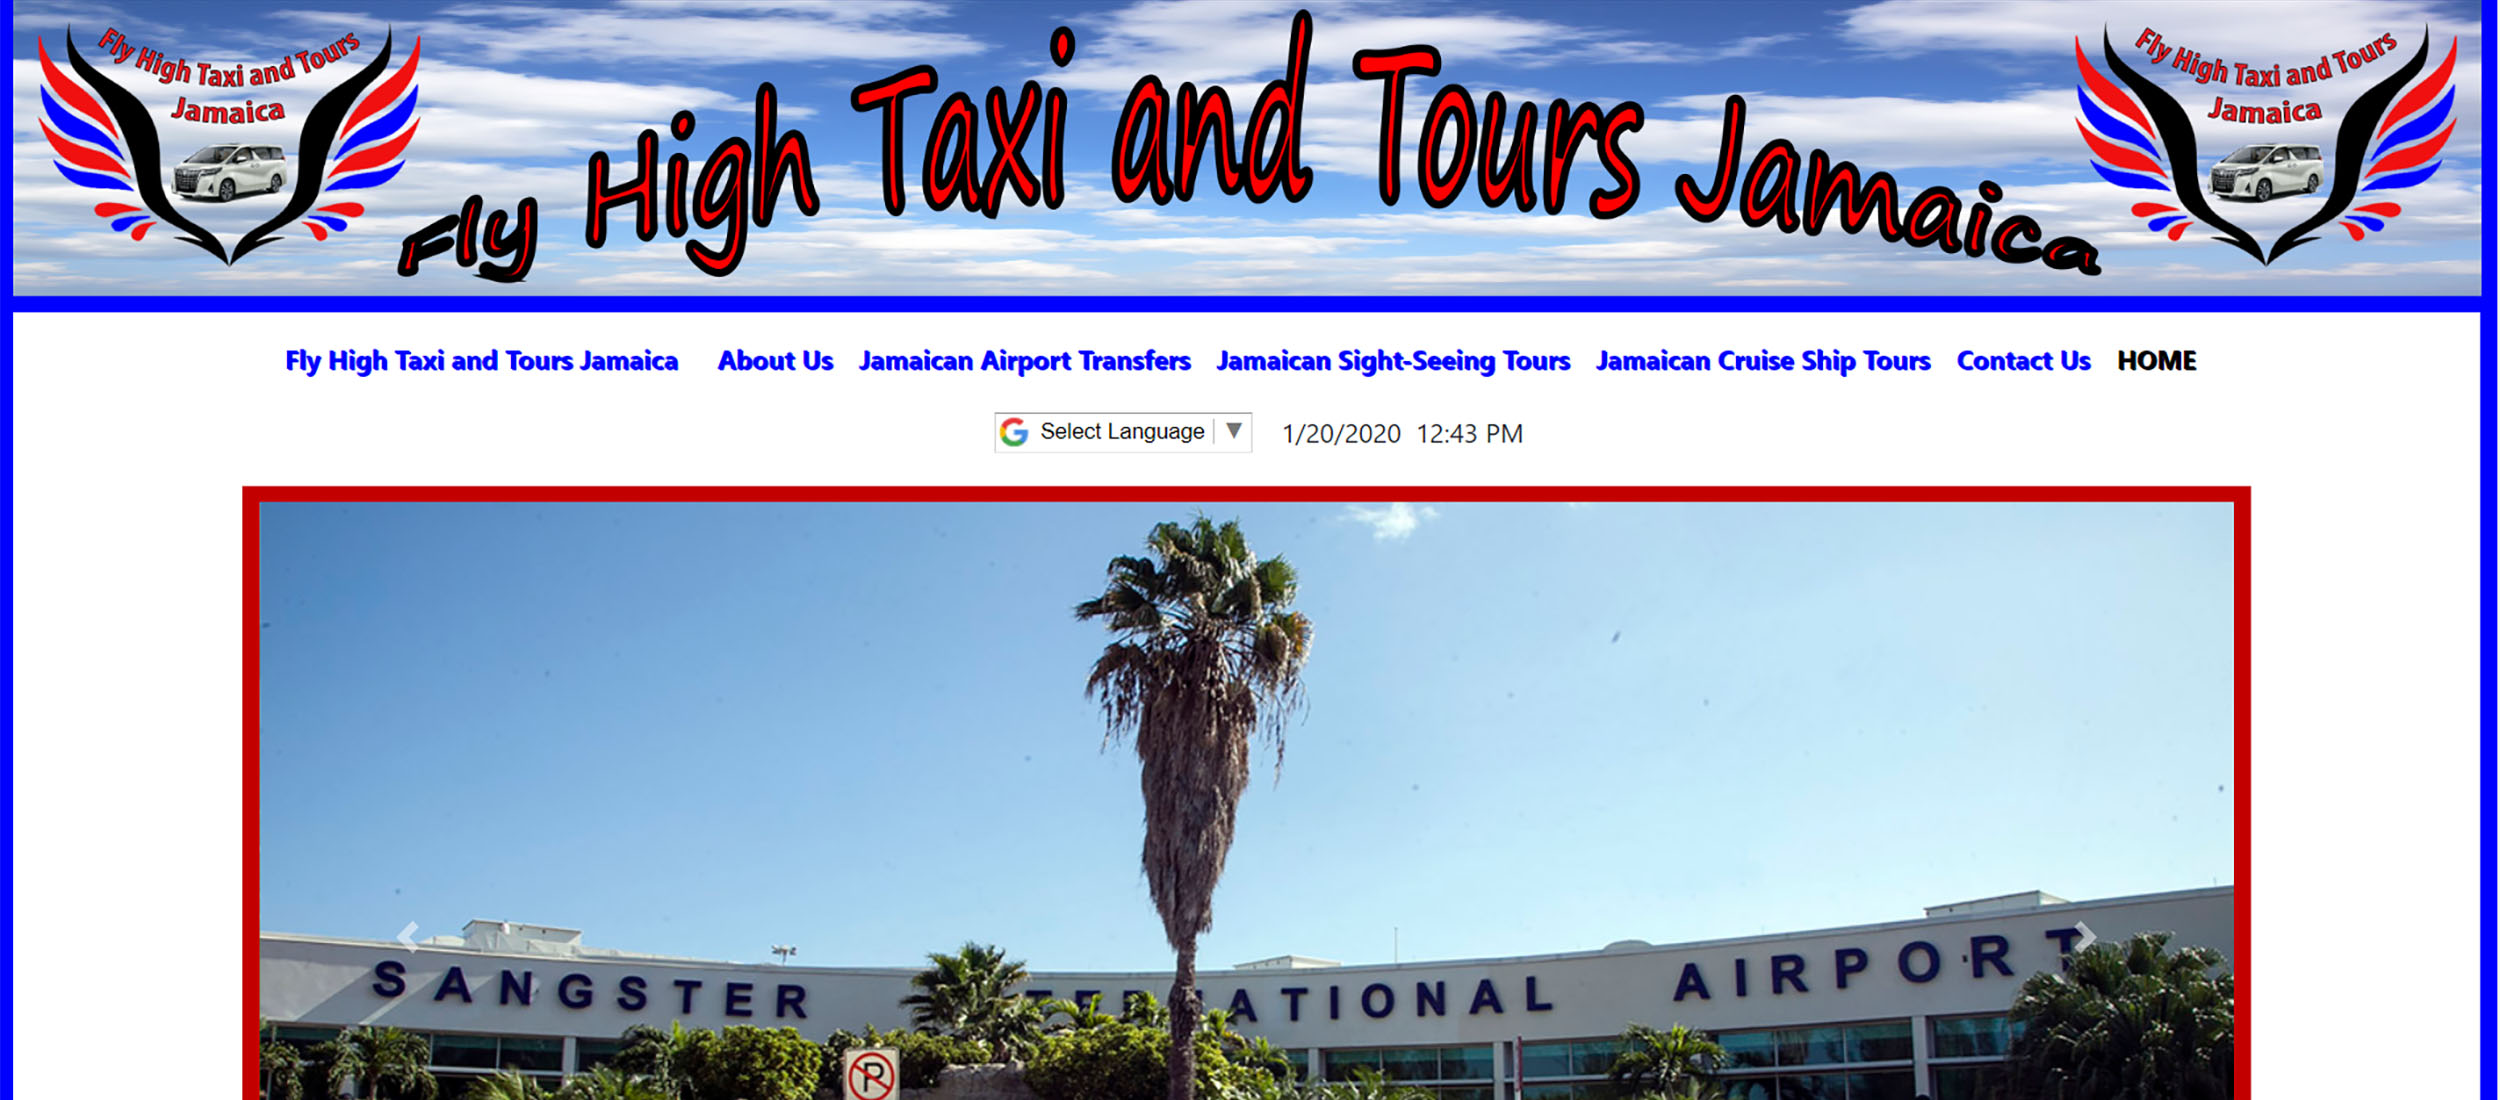 Fly High Taxi and Tours Jamaica by Barry J. Hough Sr.